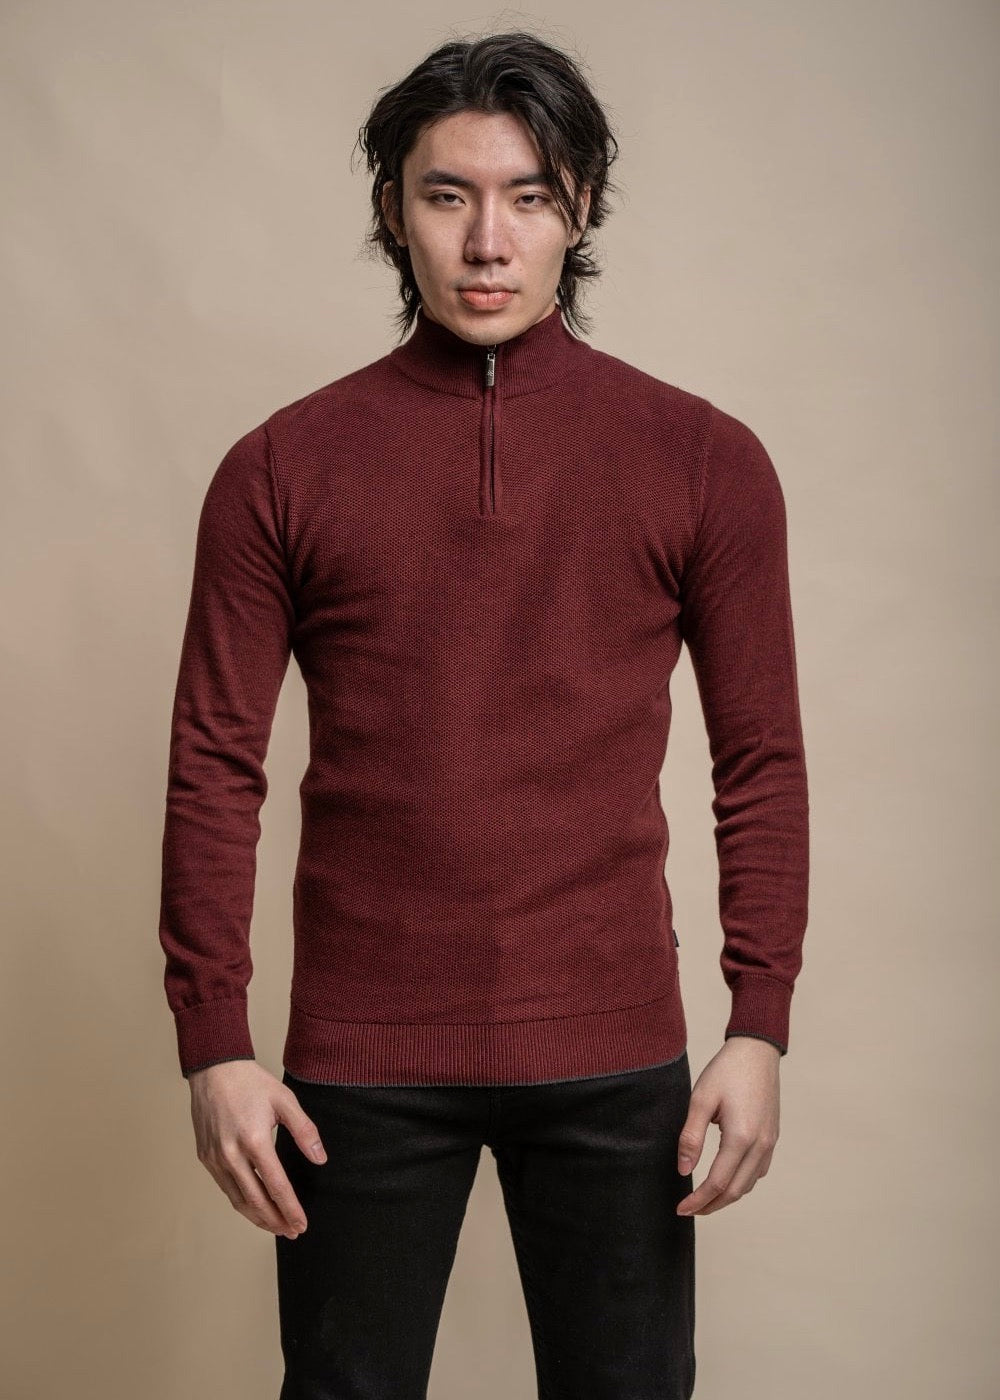 Wine colour knitted jumper for men with half-zip, showing front.